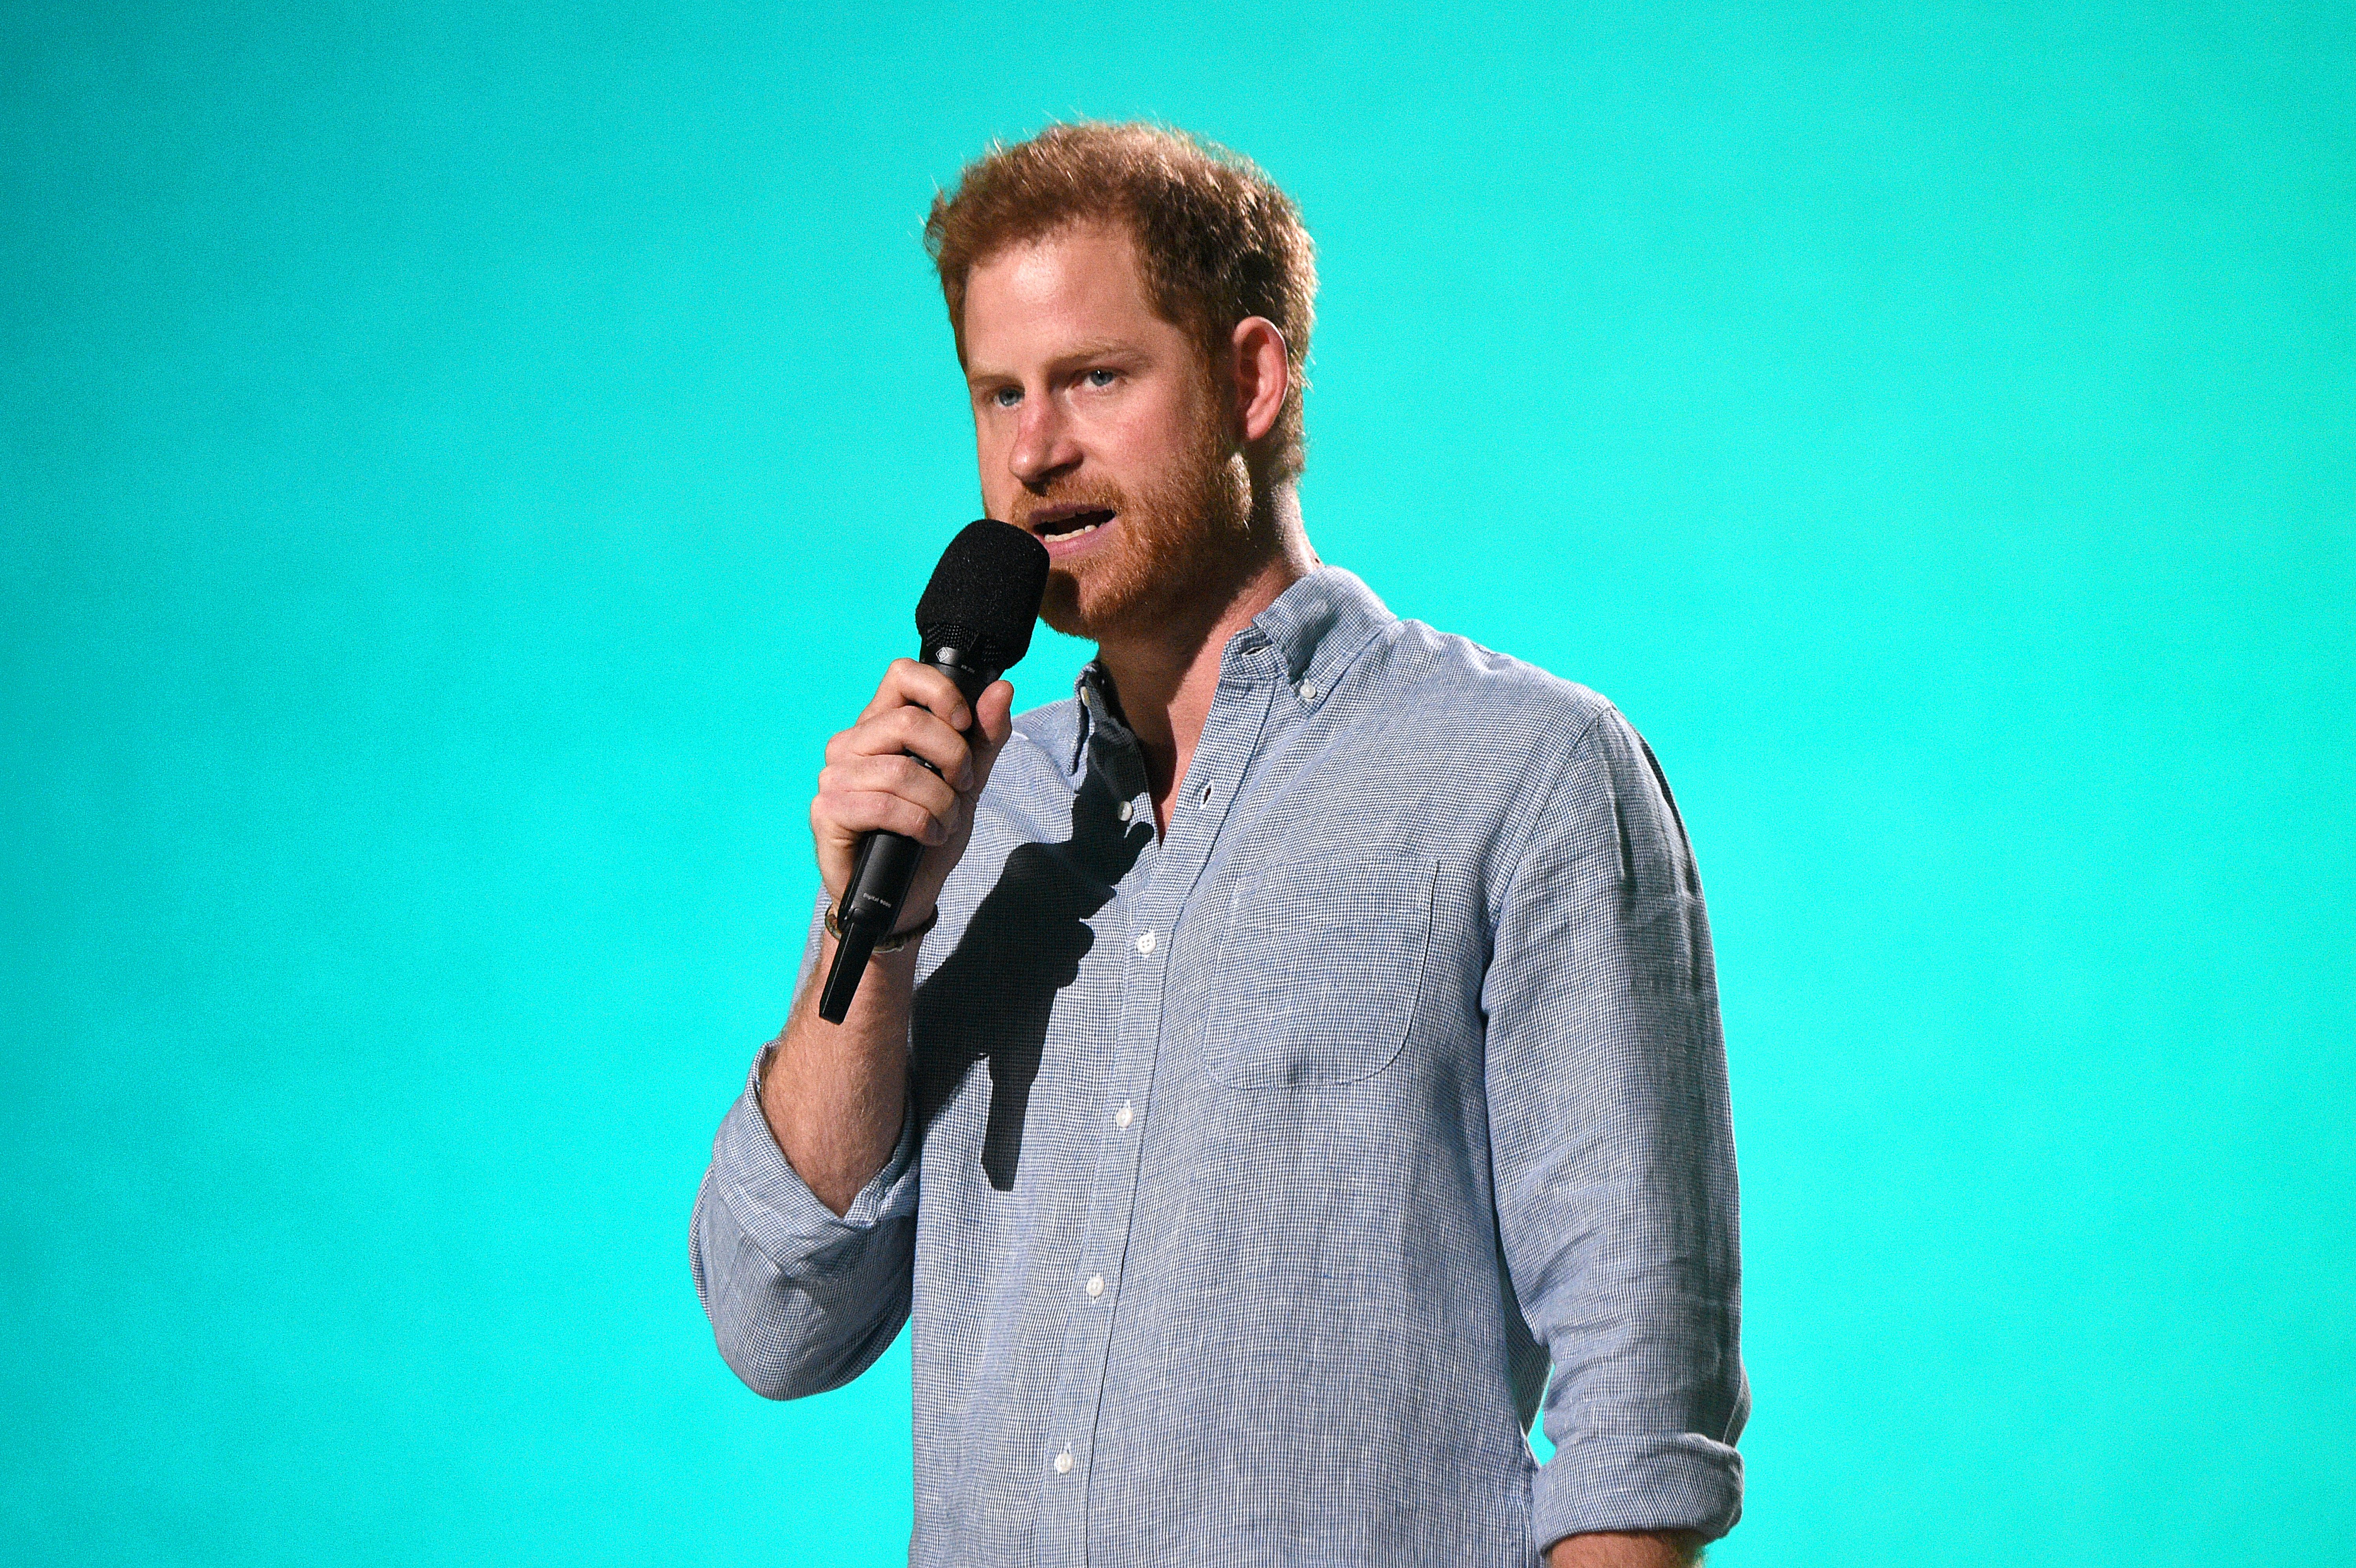 Prince Harry, The Duke of Sussex speaks onstage at SoFi Stadium in Inglewood, California, released on May 2 | Photo: Getty Images